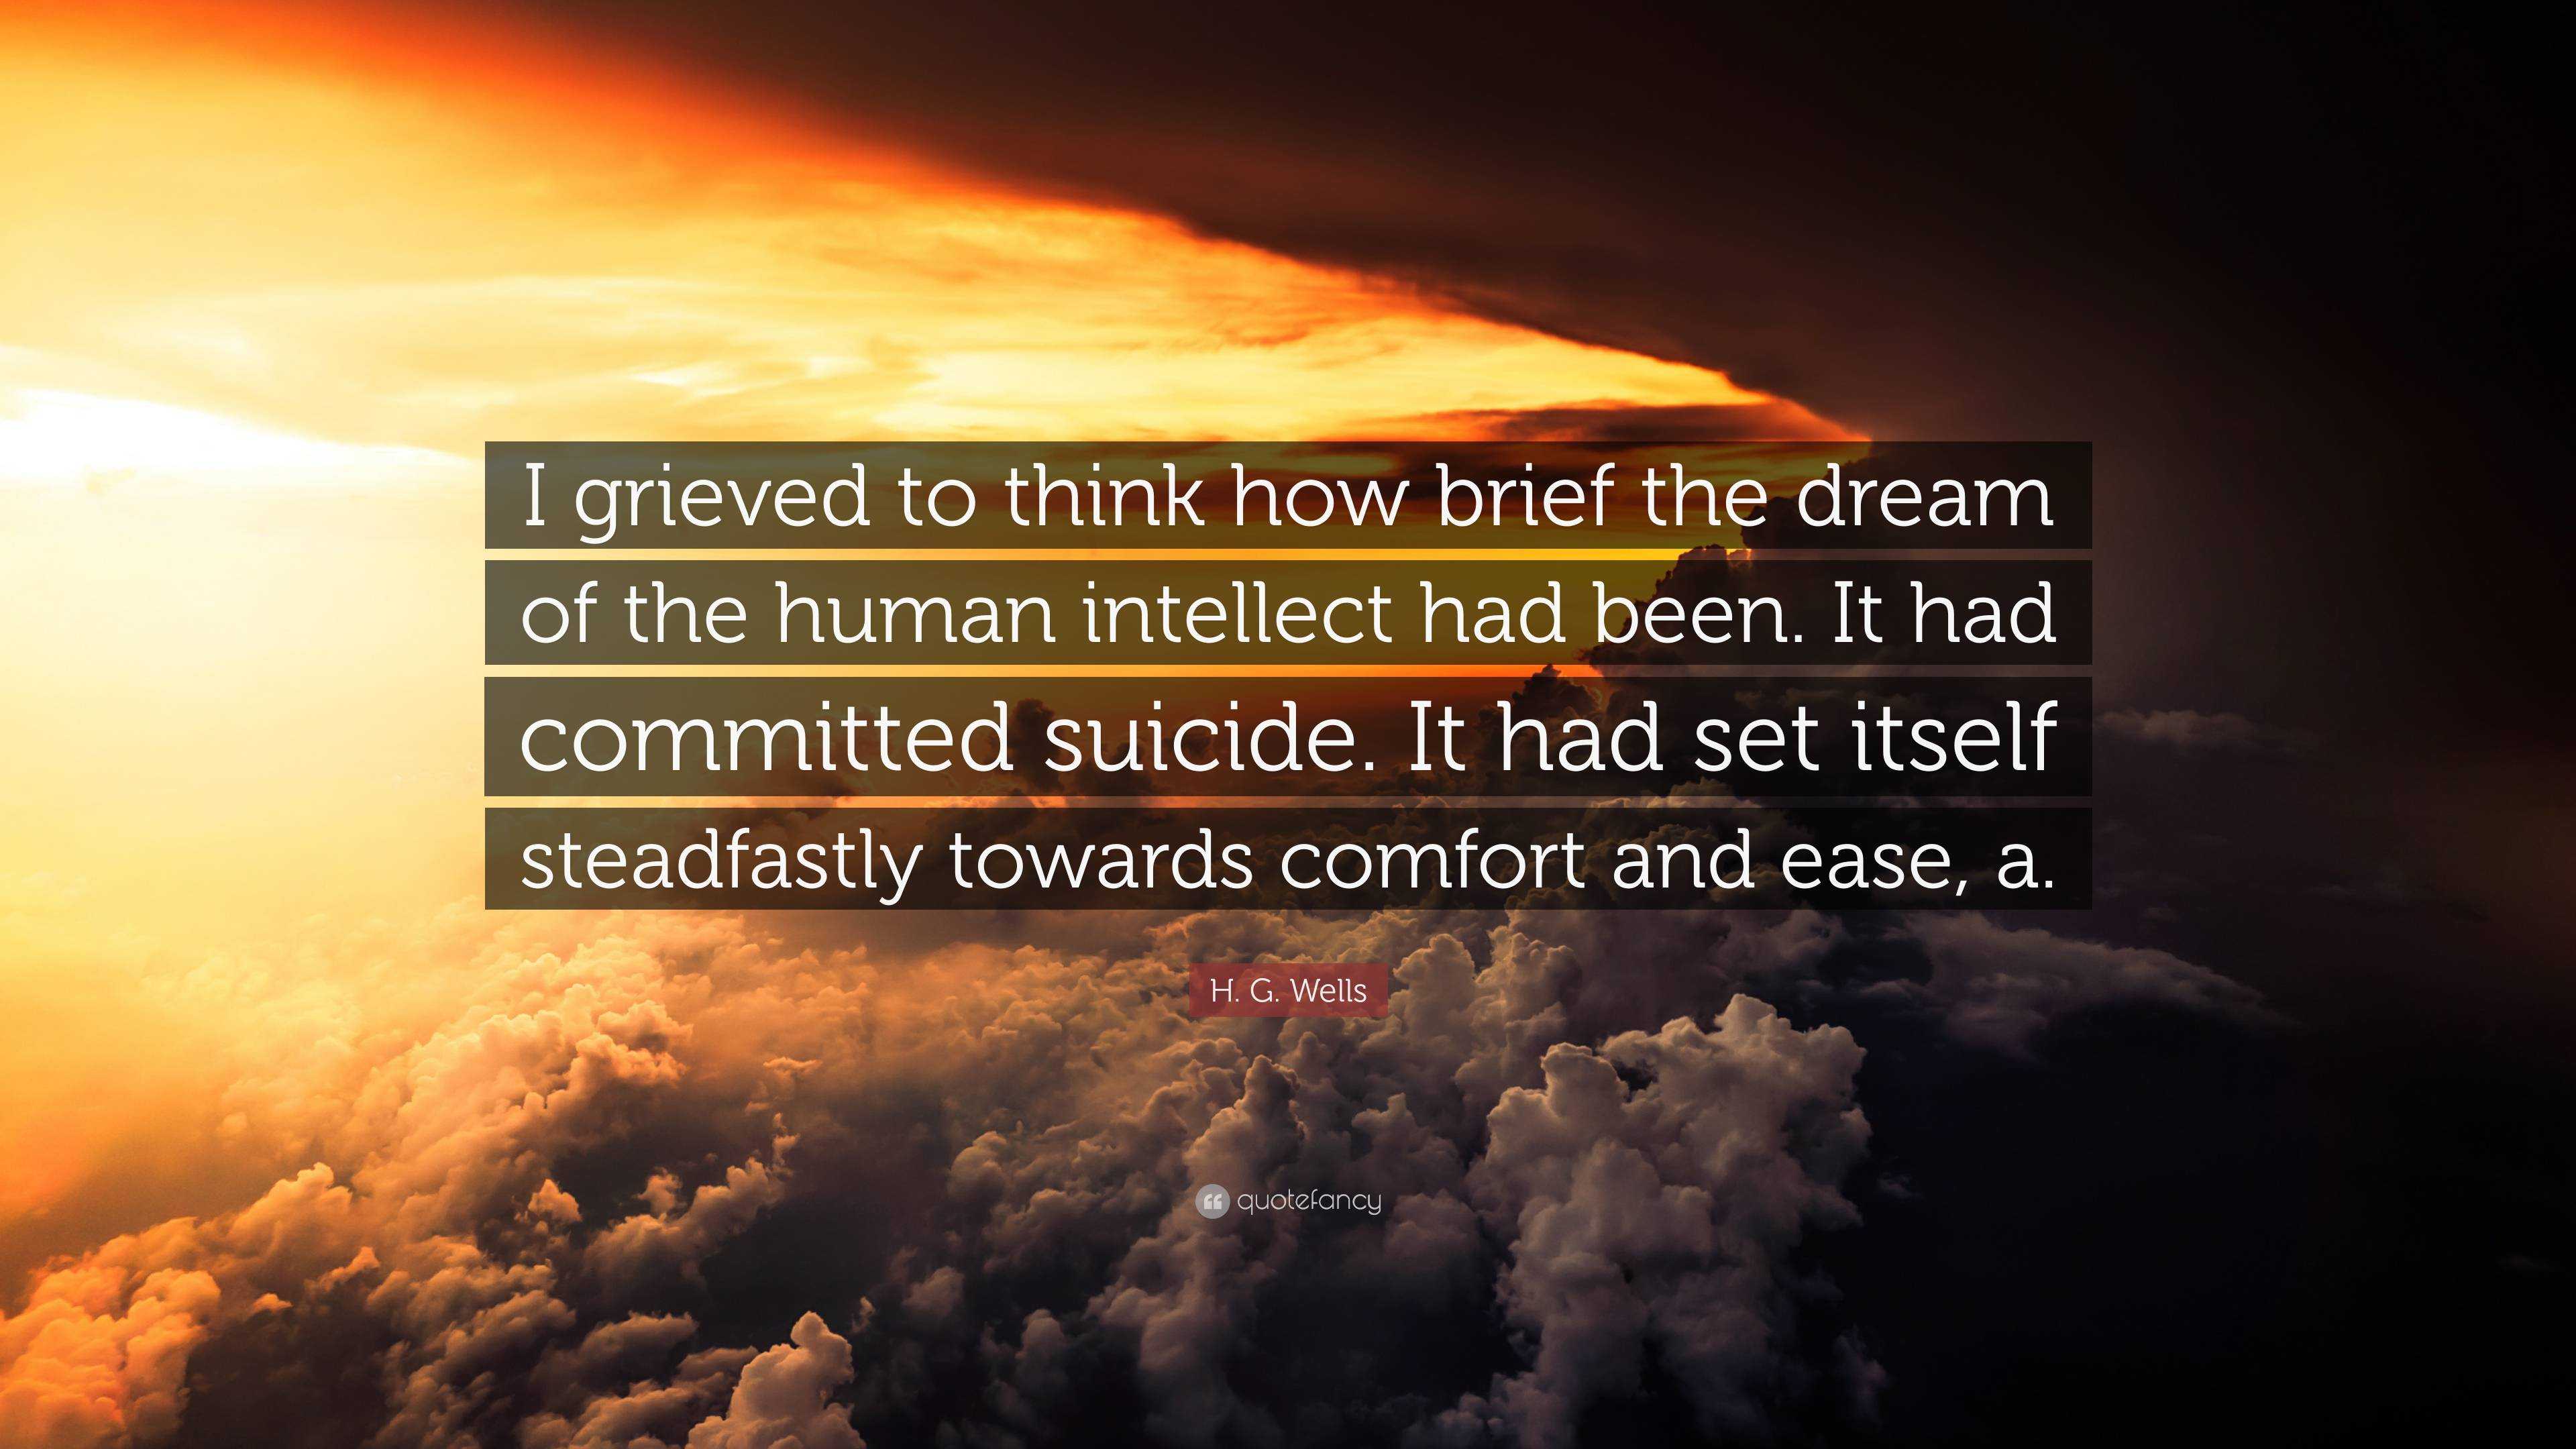 H. G. Wells Quote: “I grieved to think how brief the dream of the